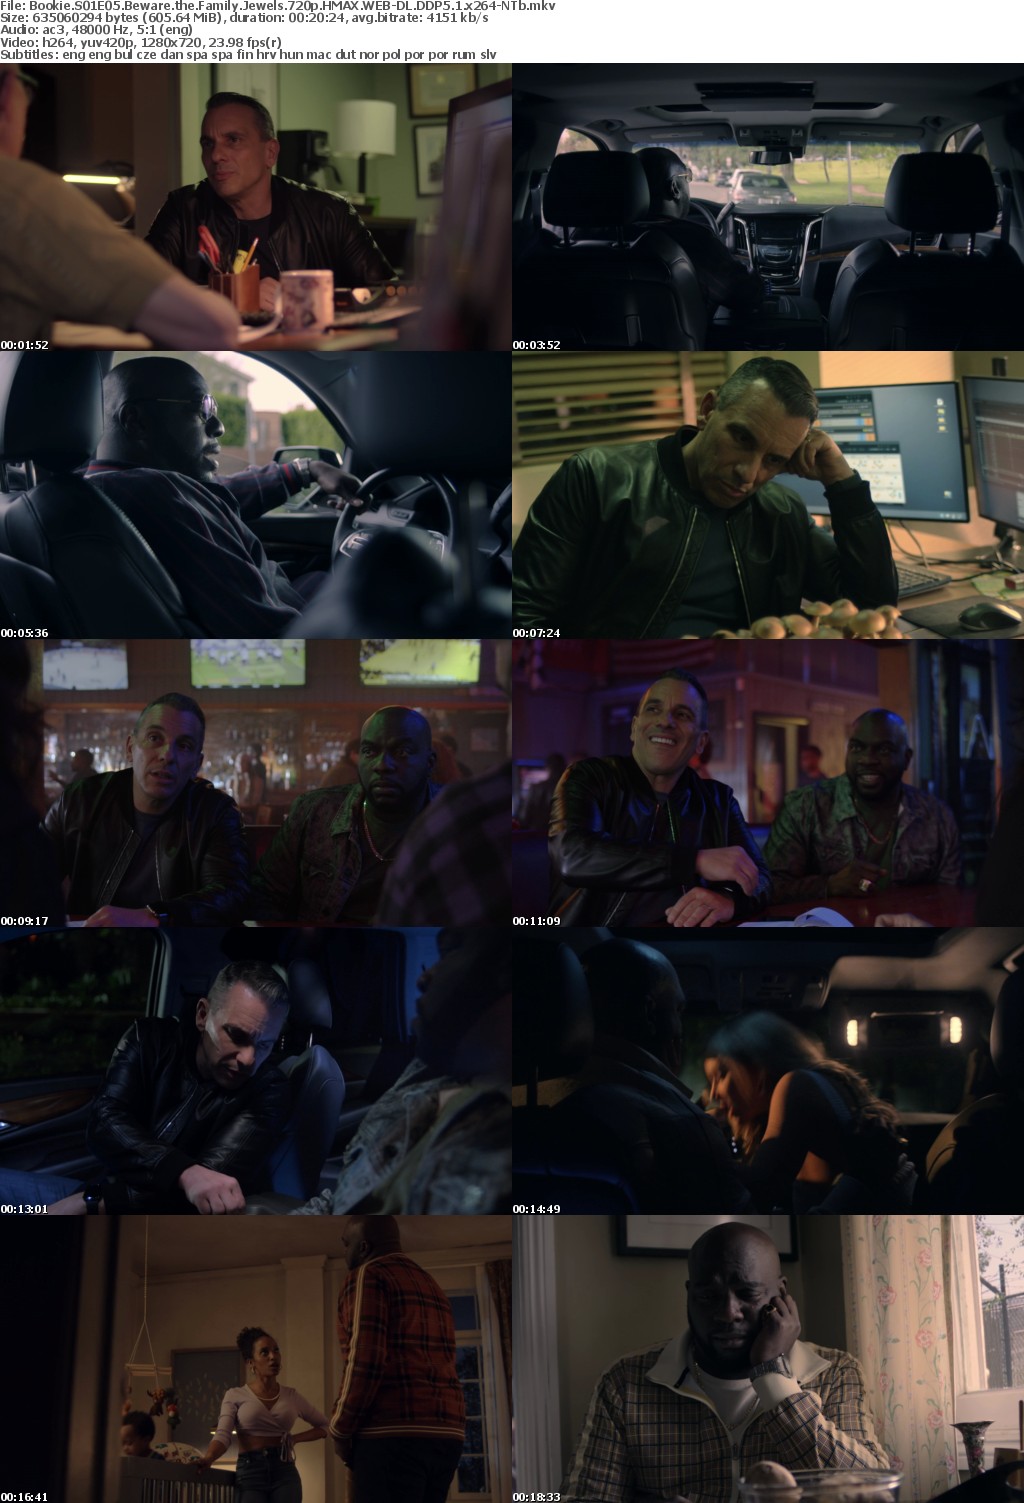 Bookie S01E05 Beware the Family Jewels 720p HMAX WEB-DL DDP5 1 x264-NTb